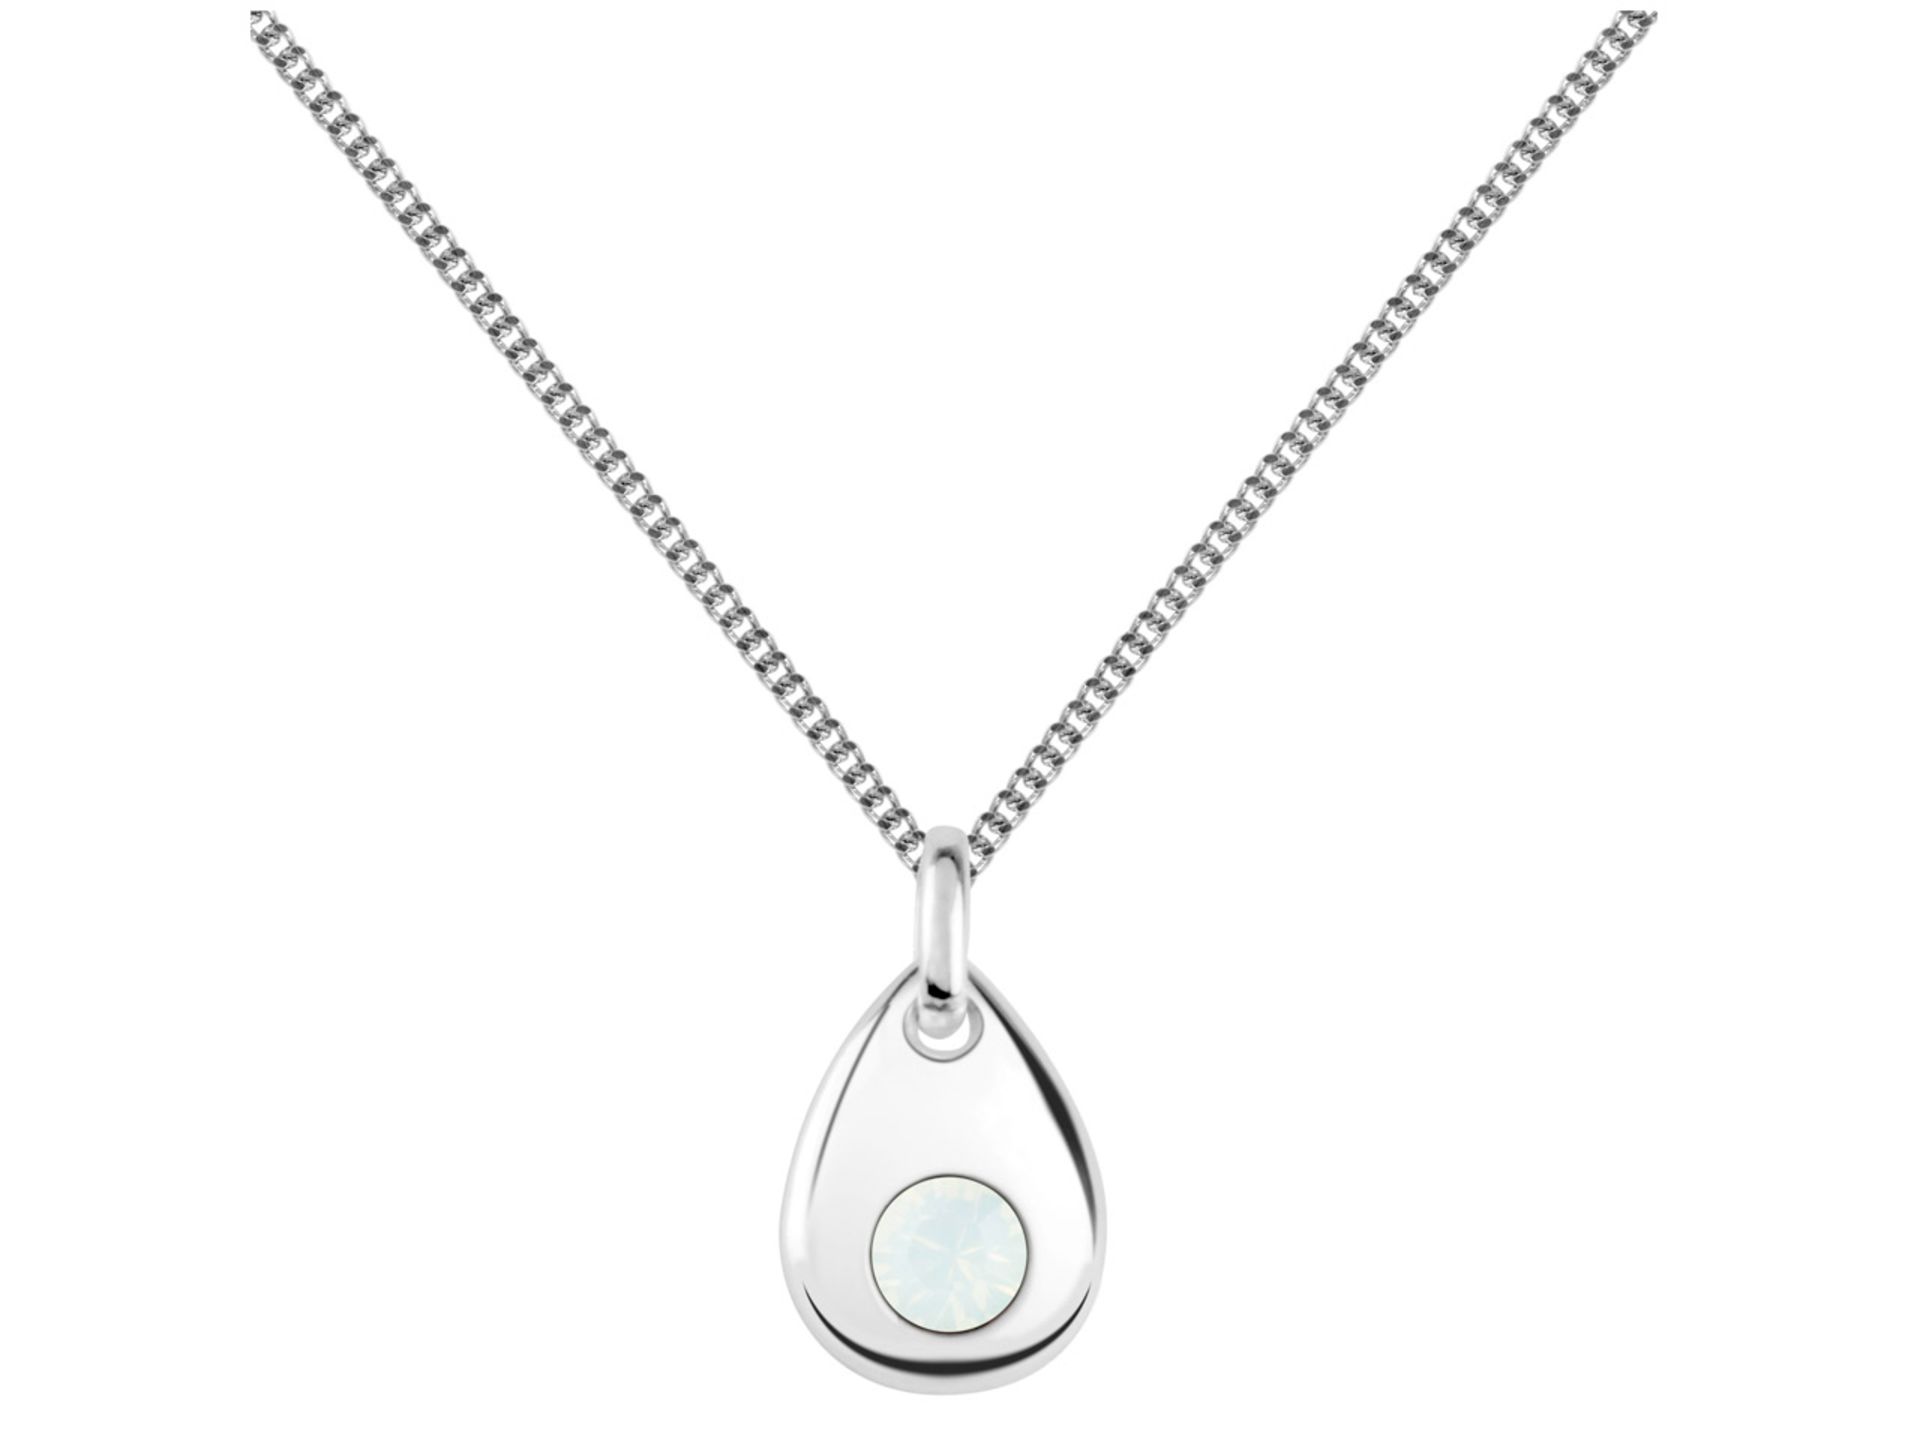 Sterling Silver Pendant October Birthstone 4mm White Opal Crystal - Valued By AGI £378.00 - - Image 3 of 4